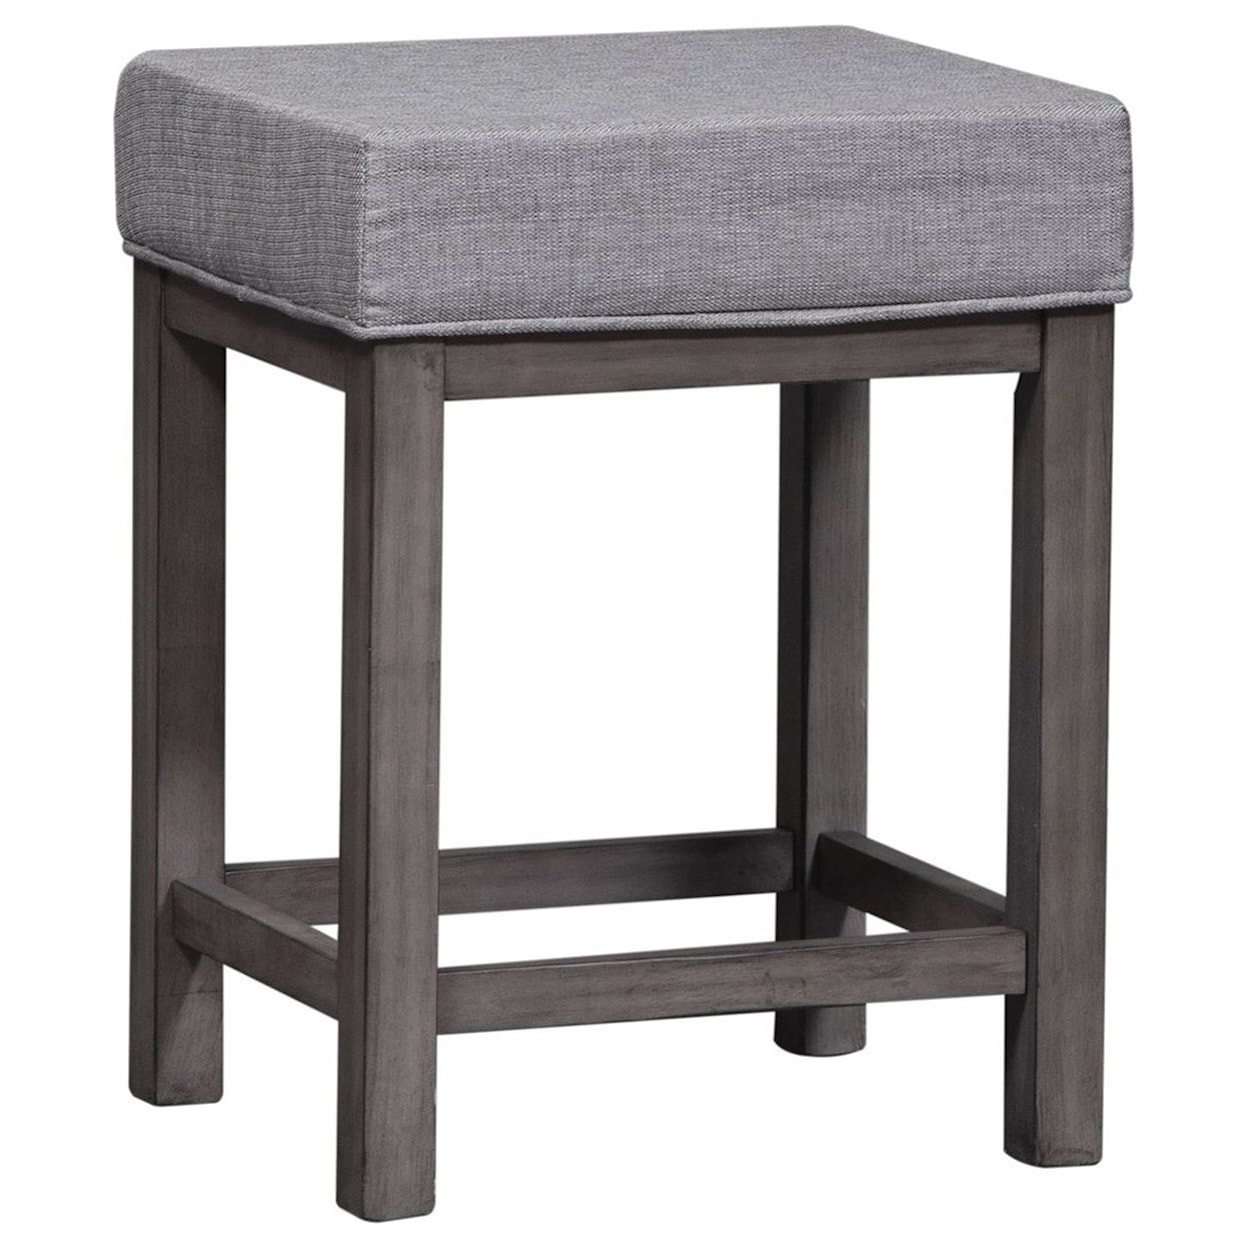 Libby Tanners Creek 3-Piece Upholstered Console Stool Set